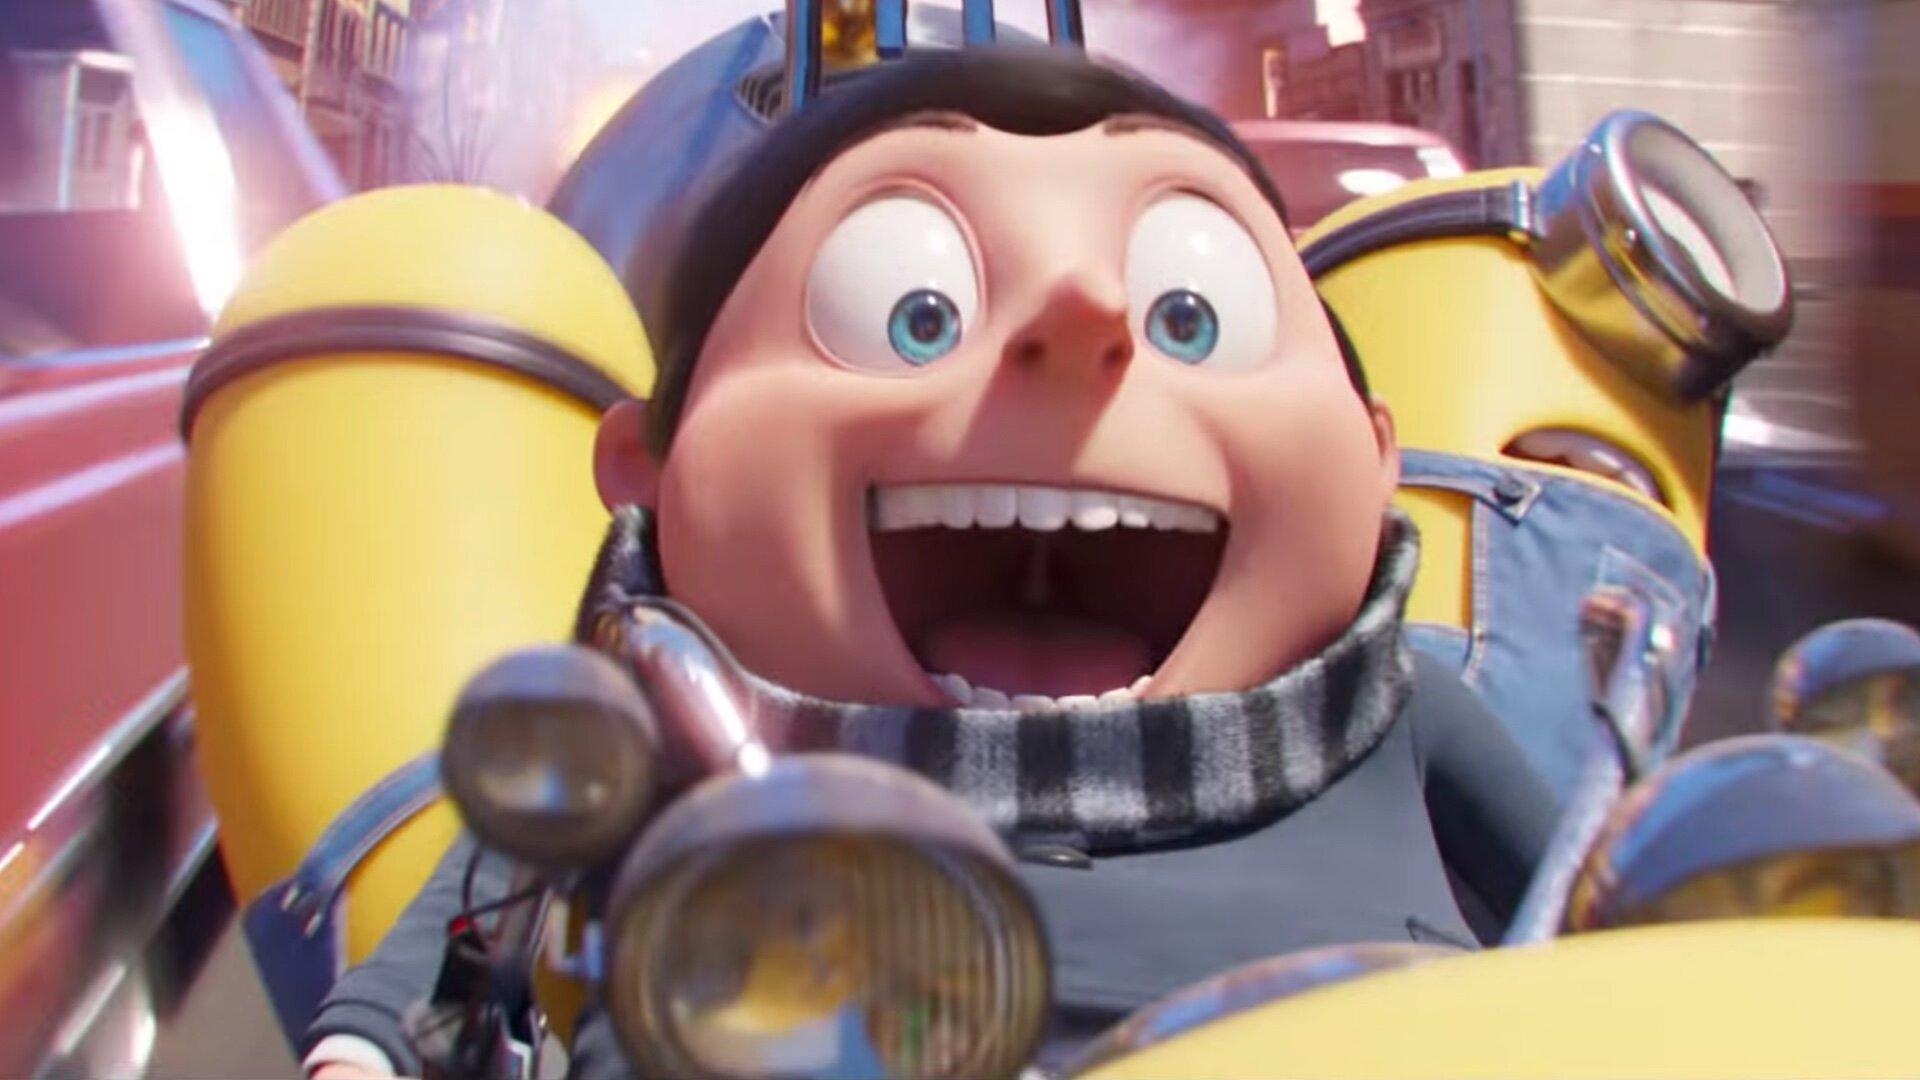 The Minions Are Back in a Super Bowl Spot for MINIONS: THE RISE OF